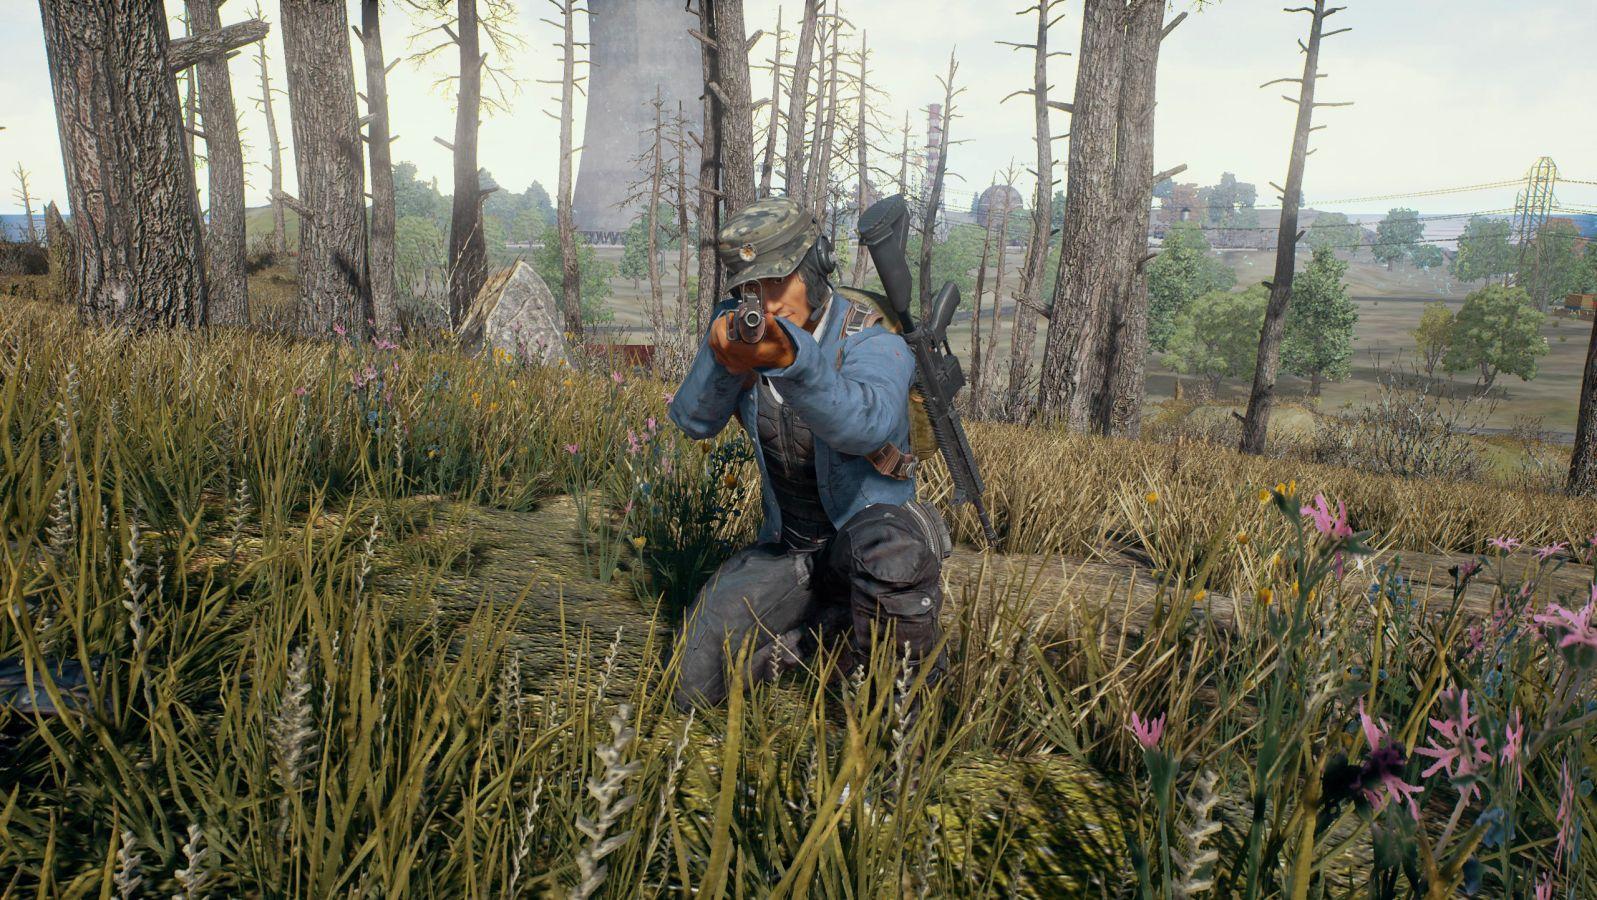 PlayerUnknown's Battlegrounds is getting a physical release